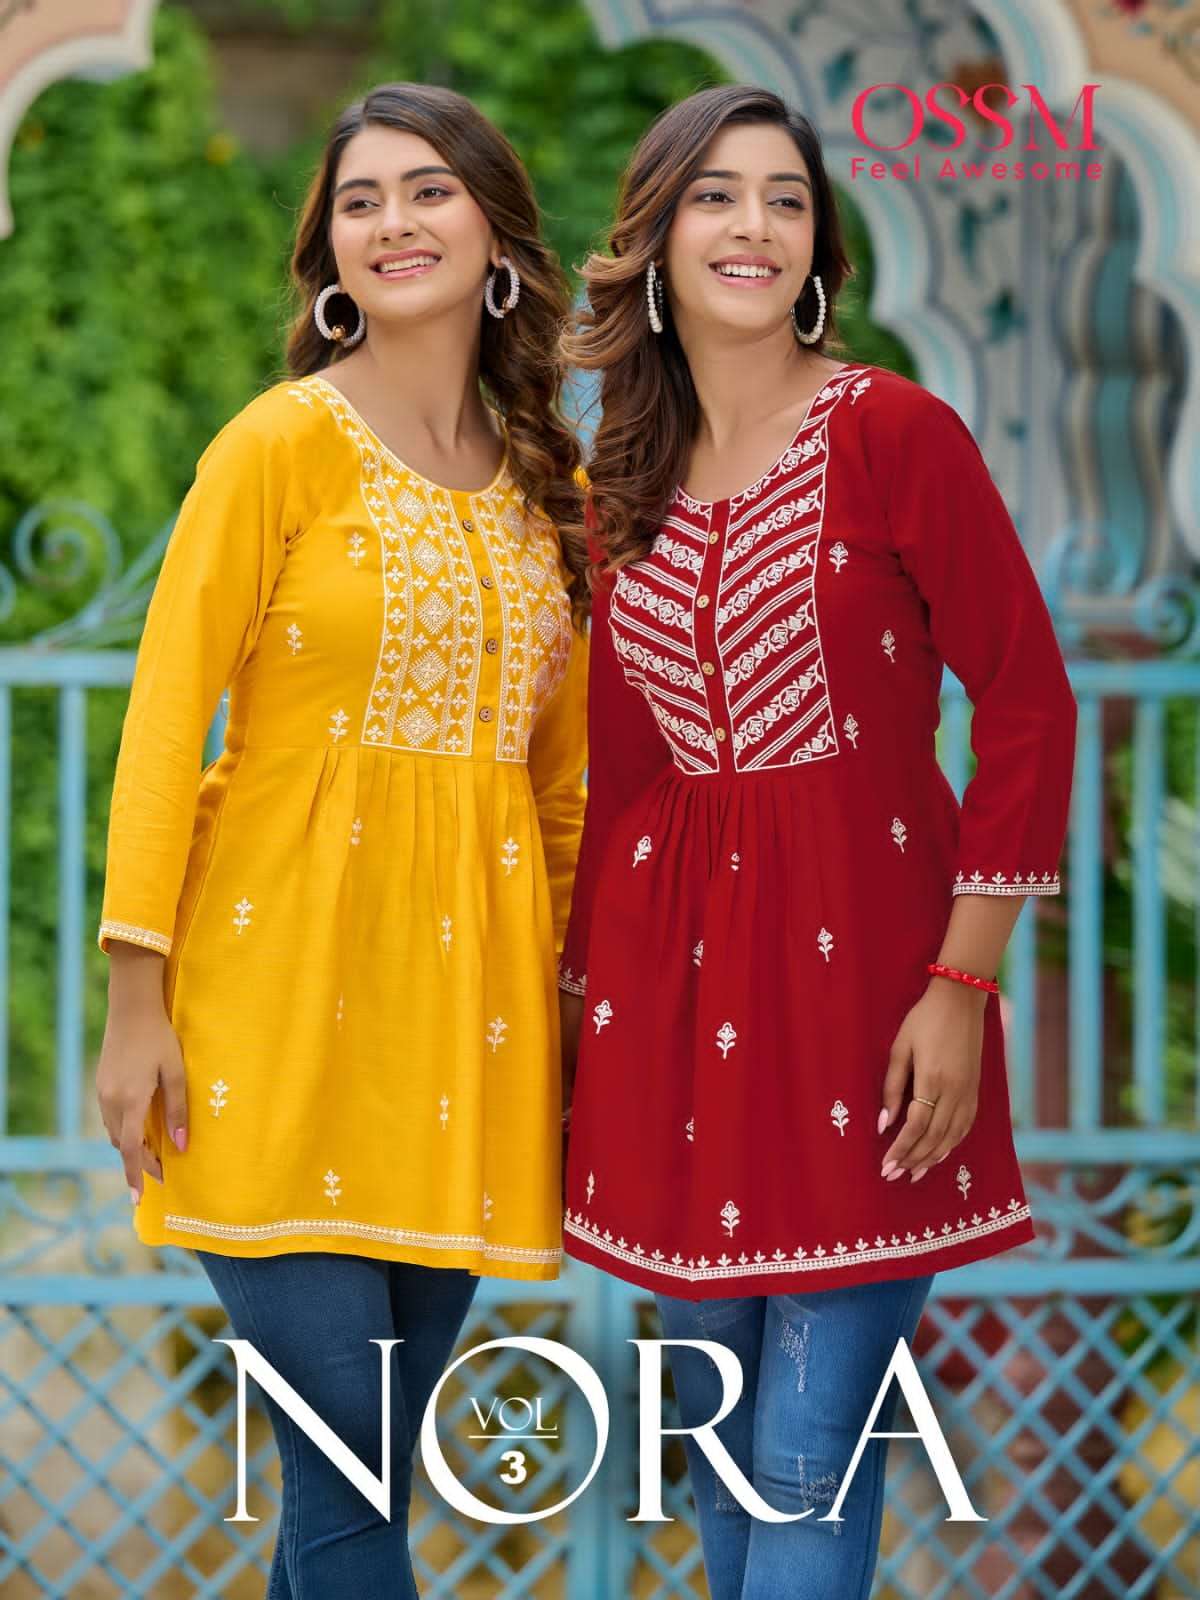 NORA VOL 3 16KG RAYON FANCY SHORT TOP BY OSSM BRAND WHOLESALR AND DELER